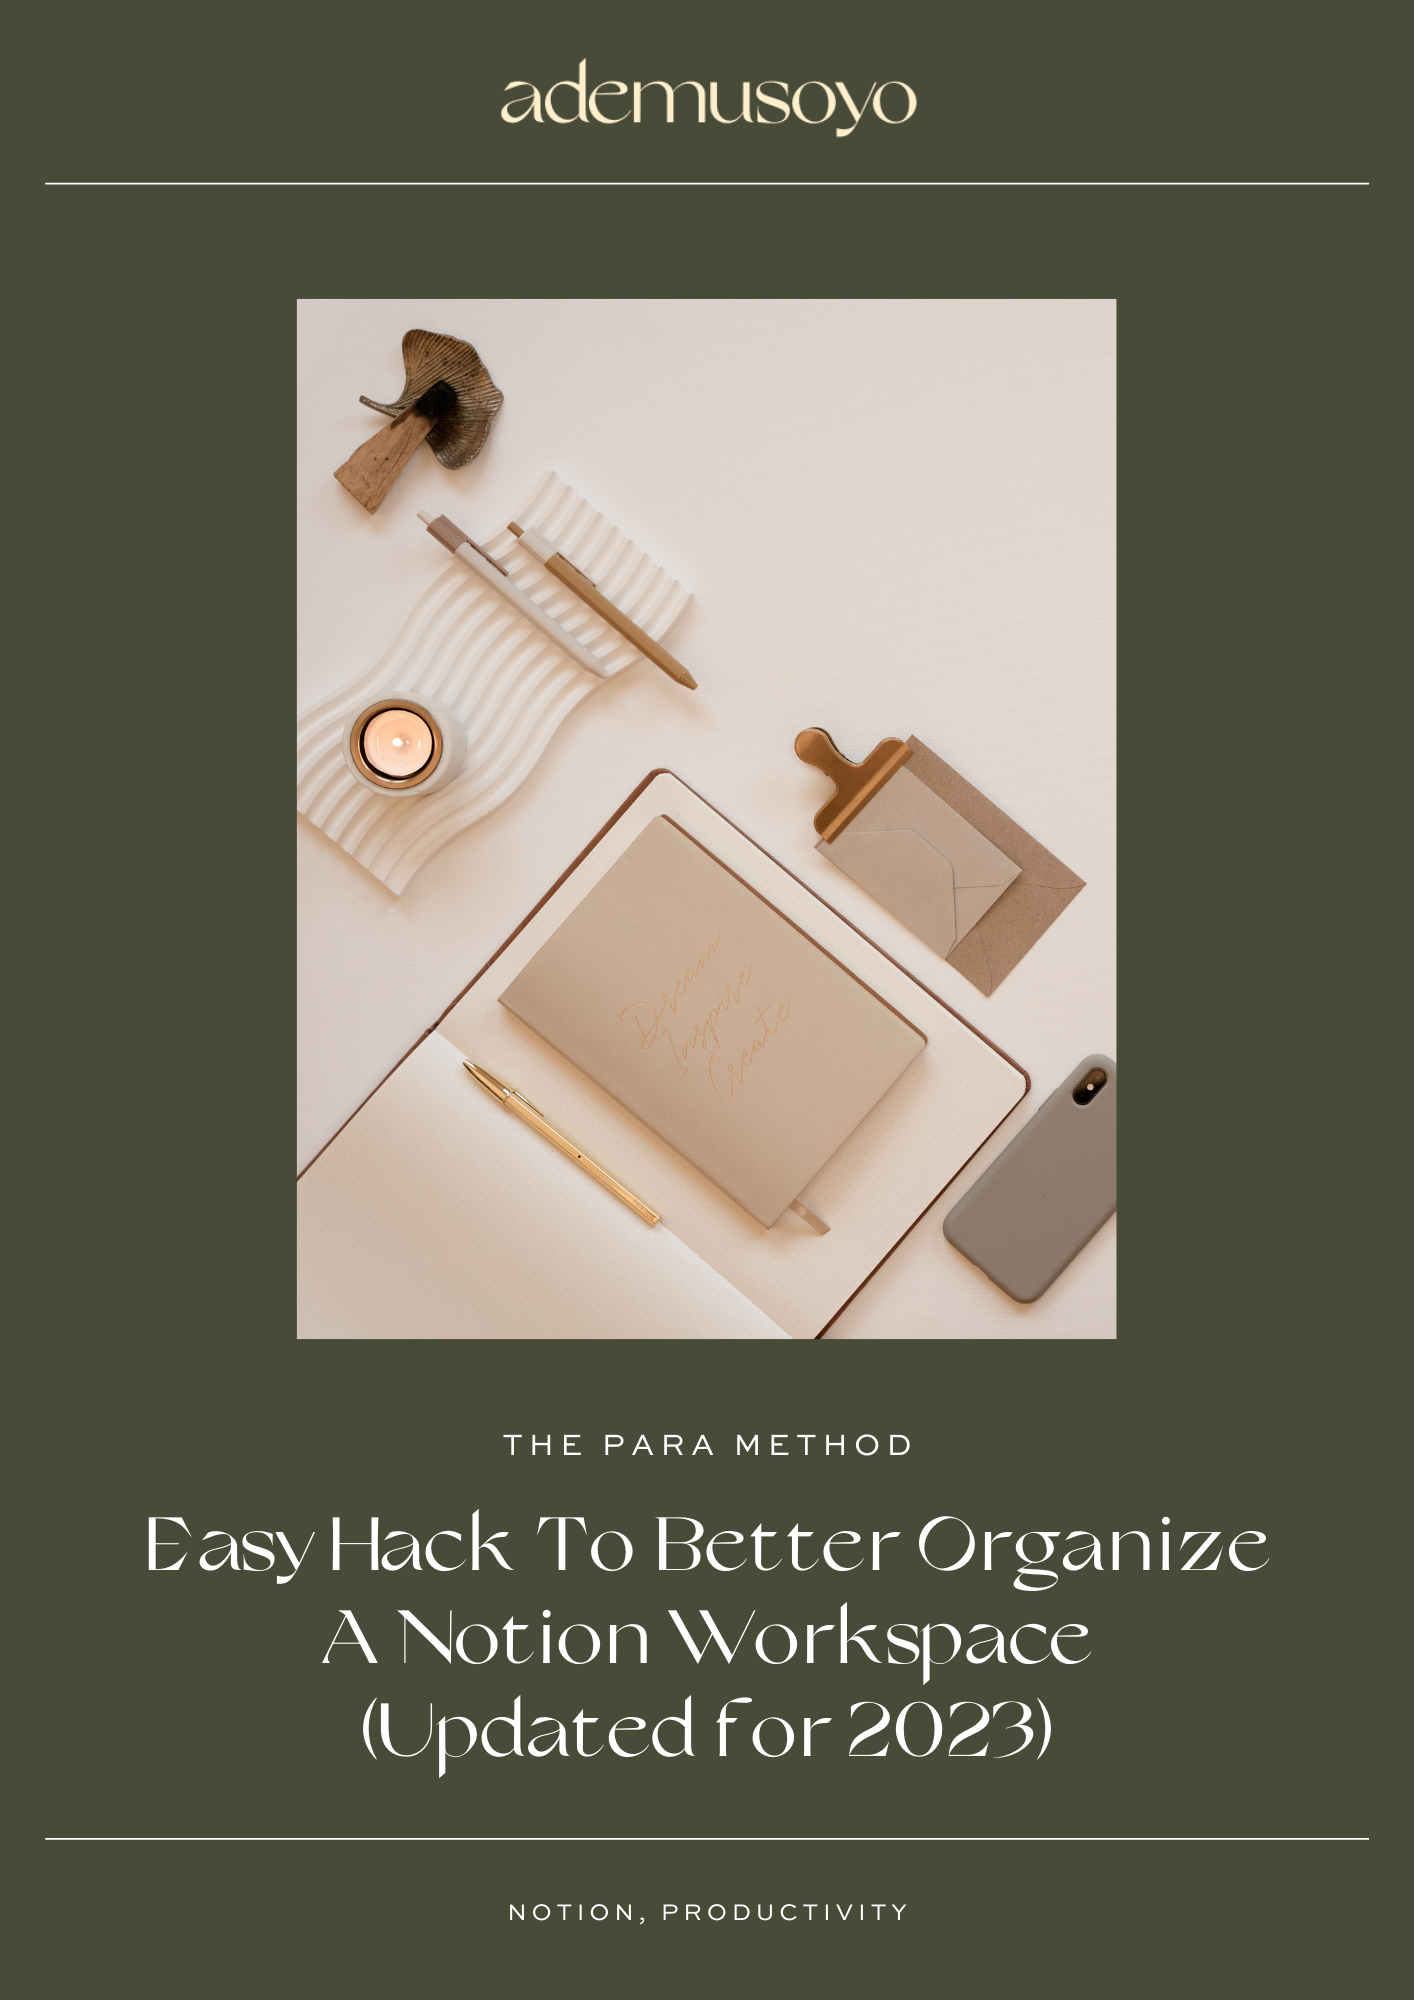 a flat lay image of an opened notebook with gold pen & another brown notebook sits on top, a grey phone, a lighted candle, pens and card & letter envelopes. A text overlay that reads The PARA Method: Easy Hack To Better Organize a Notion Workspace